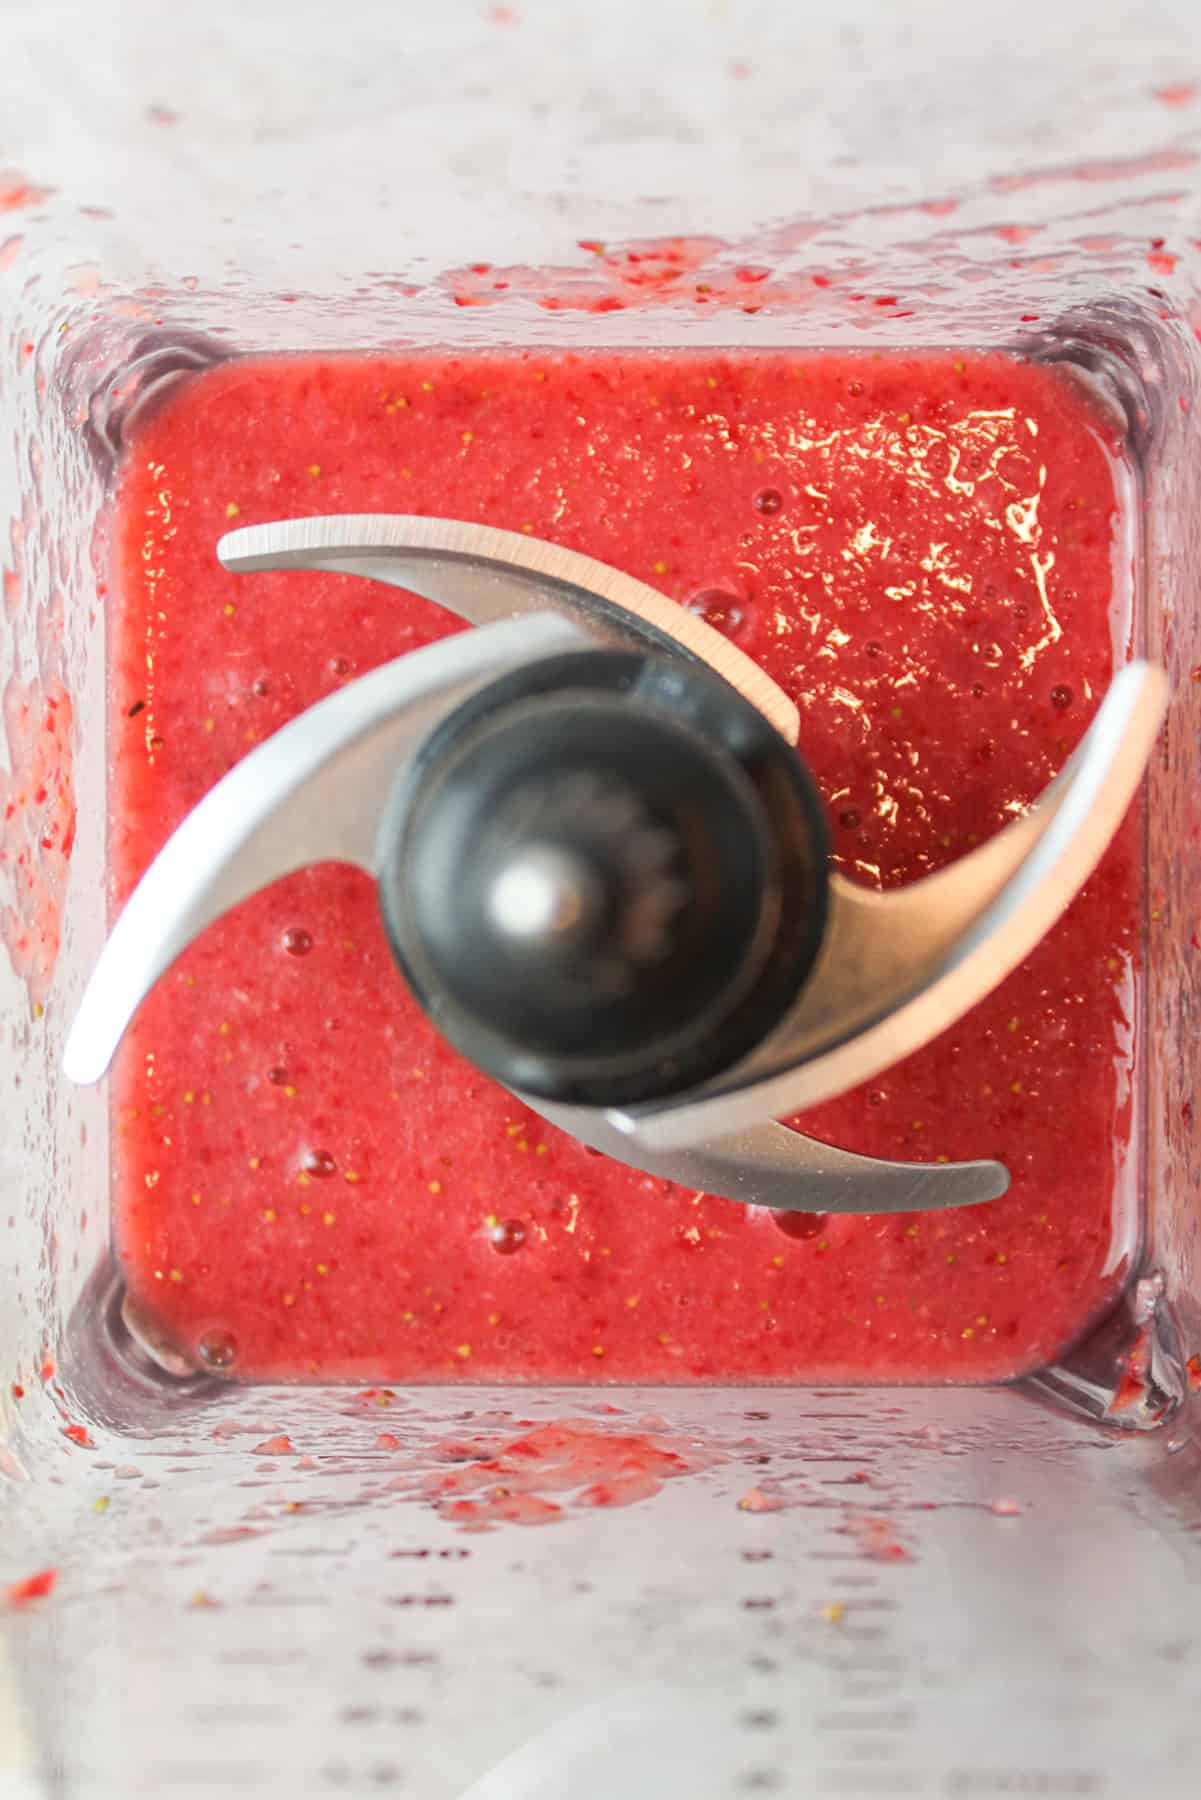 strawberry puree in a blender.